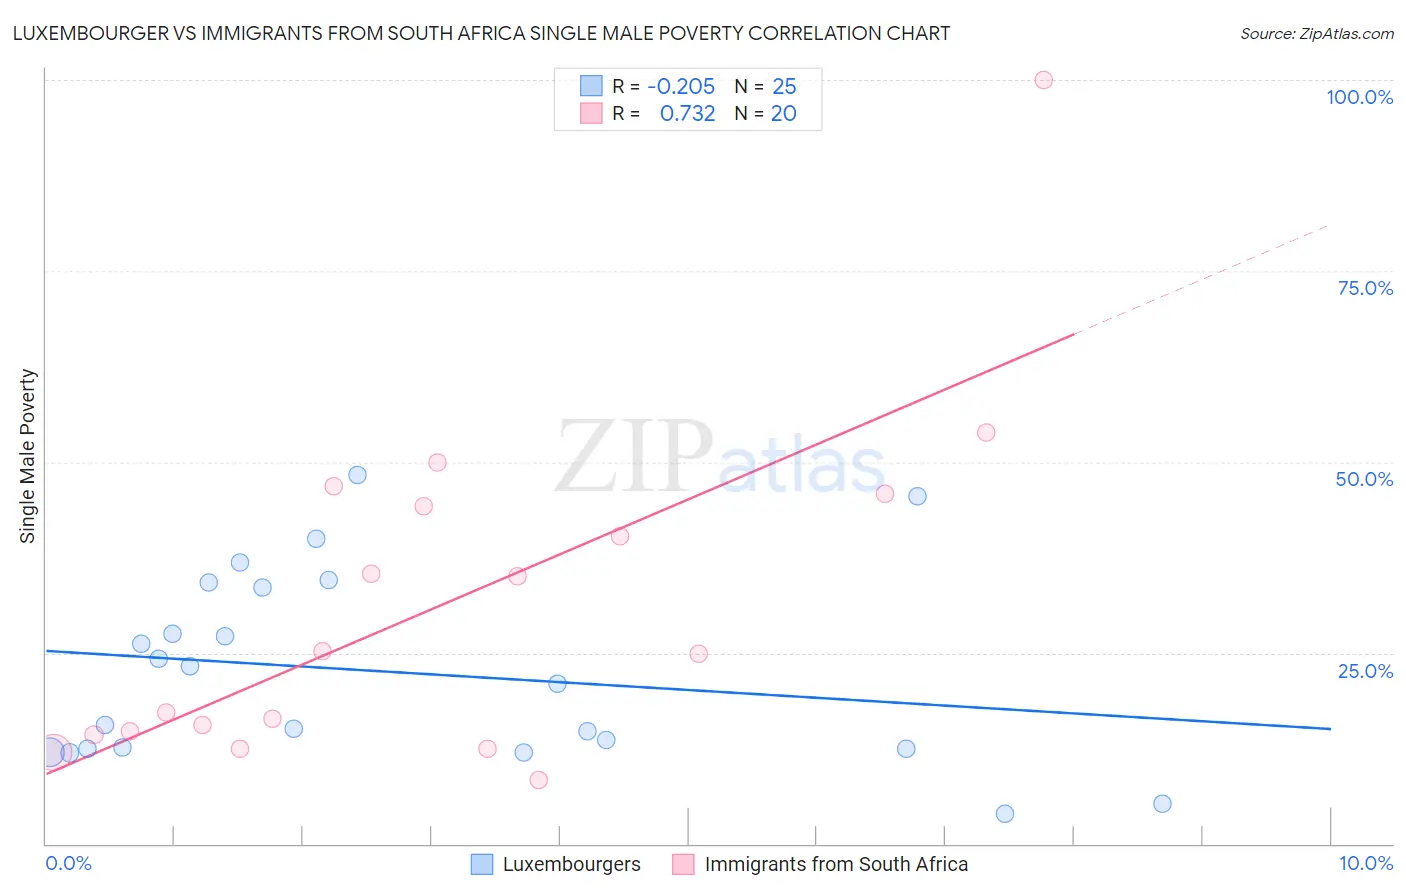 Luxembourger vs Immigrants from South Africa Single Male Poverty